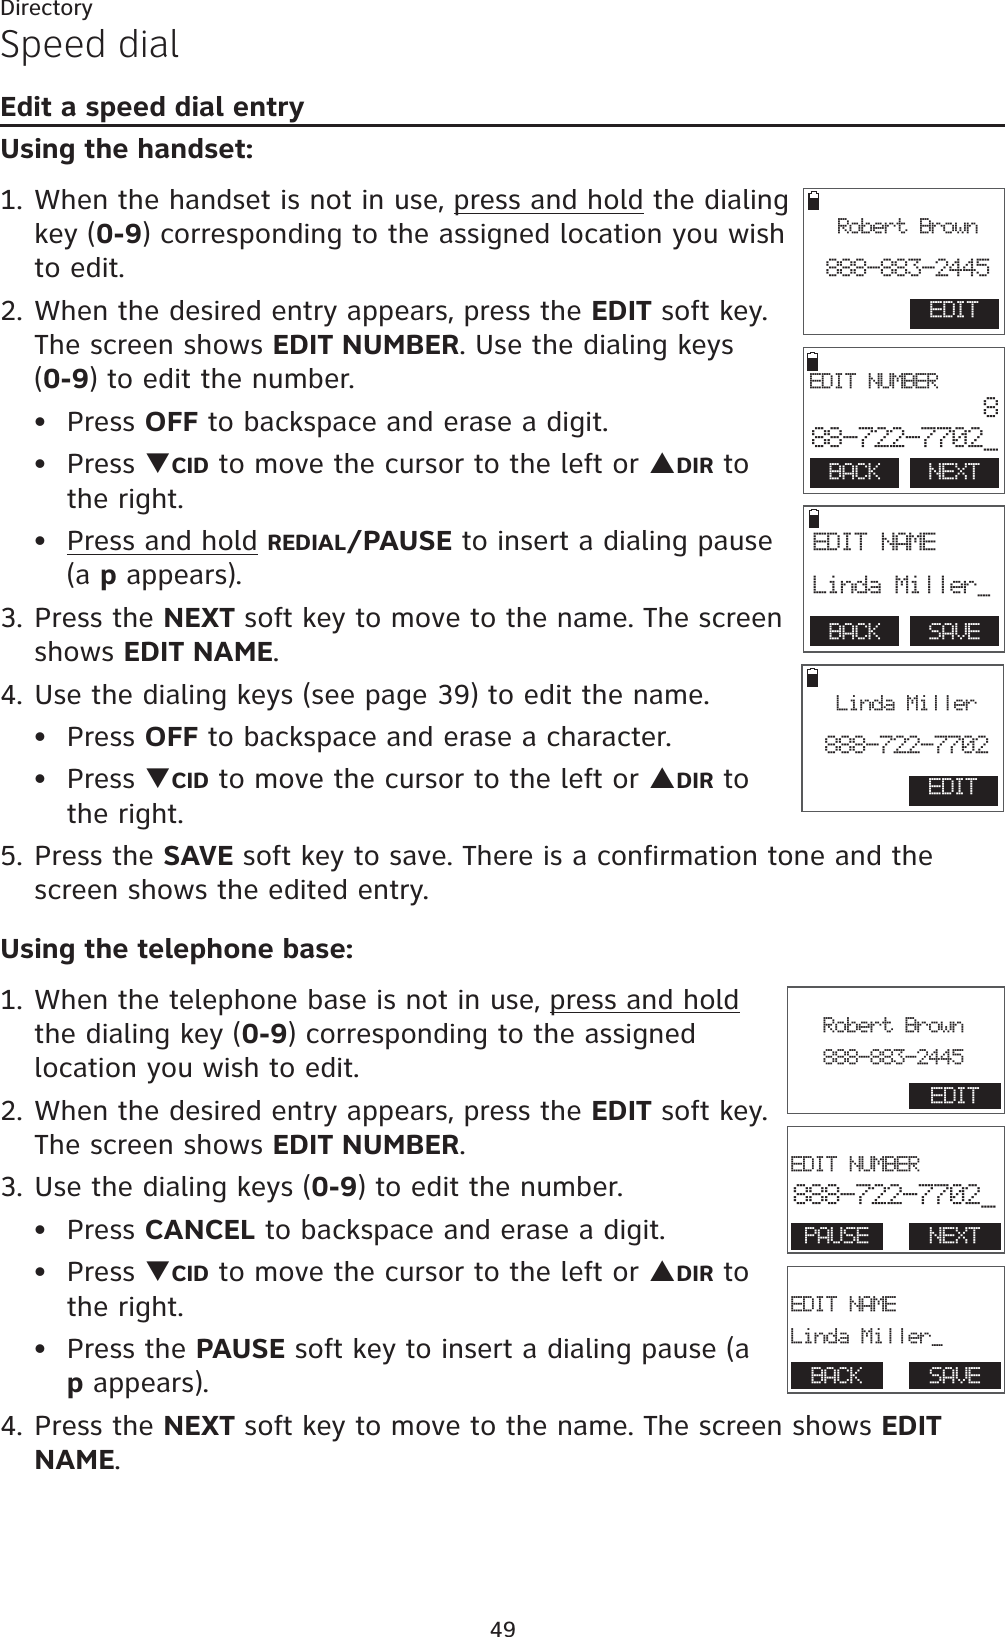 49DirectorySpeed dialEdit a speed dial entryUsing the handset:1. When the handset is not in use, press and hold the dialing key (0-9) corresponding to the assigned location you wish to edit.2. When the desired entry appears, press the EDIT soft key. The screen shows EDIT NUMBER. Use the dialing keys    (0-9) to edit the number.Press OFF to backspace and erase a digit.Press TCID to move the cursor to the left or SDIR to the right.Press and hold REDIAL/PAUSE to insert a dialing pause (a p appears).3. Press the NEXT soft key to move to the name. The screen shows EDIT NAME.4. Use the dialing keys (see page 39) to edit the name.Press OFF to backspace and erase a character.Press TCID to move the cursor to the left or SDIR to  the right.5. Press the SAVE soft key to save. There is a confirmation tone and the screen shows the edited entry. Using the telephone base:1. When the telephone base is not in use, press and holdthe dialing key (0-9) corresponding to the assigned location you wish to edit.2. When the desired entry appears, press the EDIT soft key. The screen shows EDIT NUMBER.3. Use the dialing keys (0-9) to edit the number.Press CANCEL to backspace and erase a digit.Press TCID to move the cursor to the left or SDIR to the right.Press the PAUSE soft key to insert a dialing pause (a p appears).4. Press the NEXT soft key to move to the name. The screen shows EDITNAME.••••••••BACK    NEXT EDIT NUMBER888-722-7702_BACK    SAVE EDIT NAME Linda Miller_EDITRobert Brown888-883-2445EDITLinda Miller888-722-7702                       EDIT NUMBER888-722-7702_PAUSE NEXT                       EDIT NAMELinda Miller_BACK SAVE                       Robert Brown888-883-2445EDIT